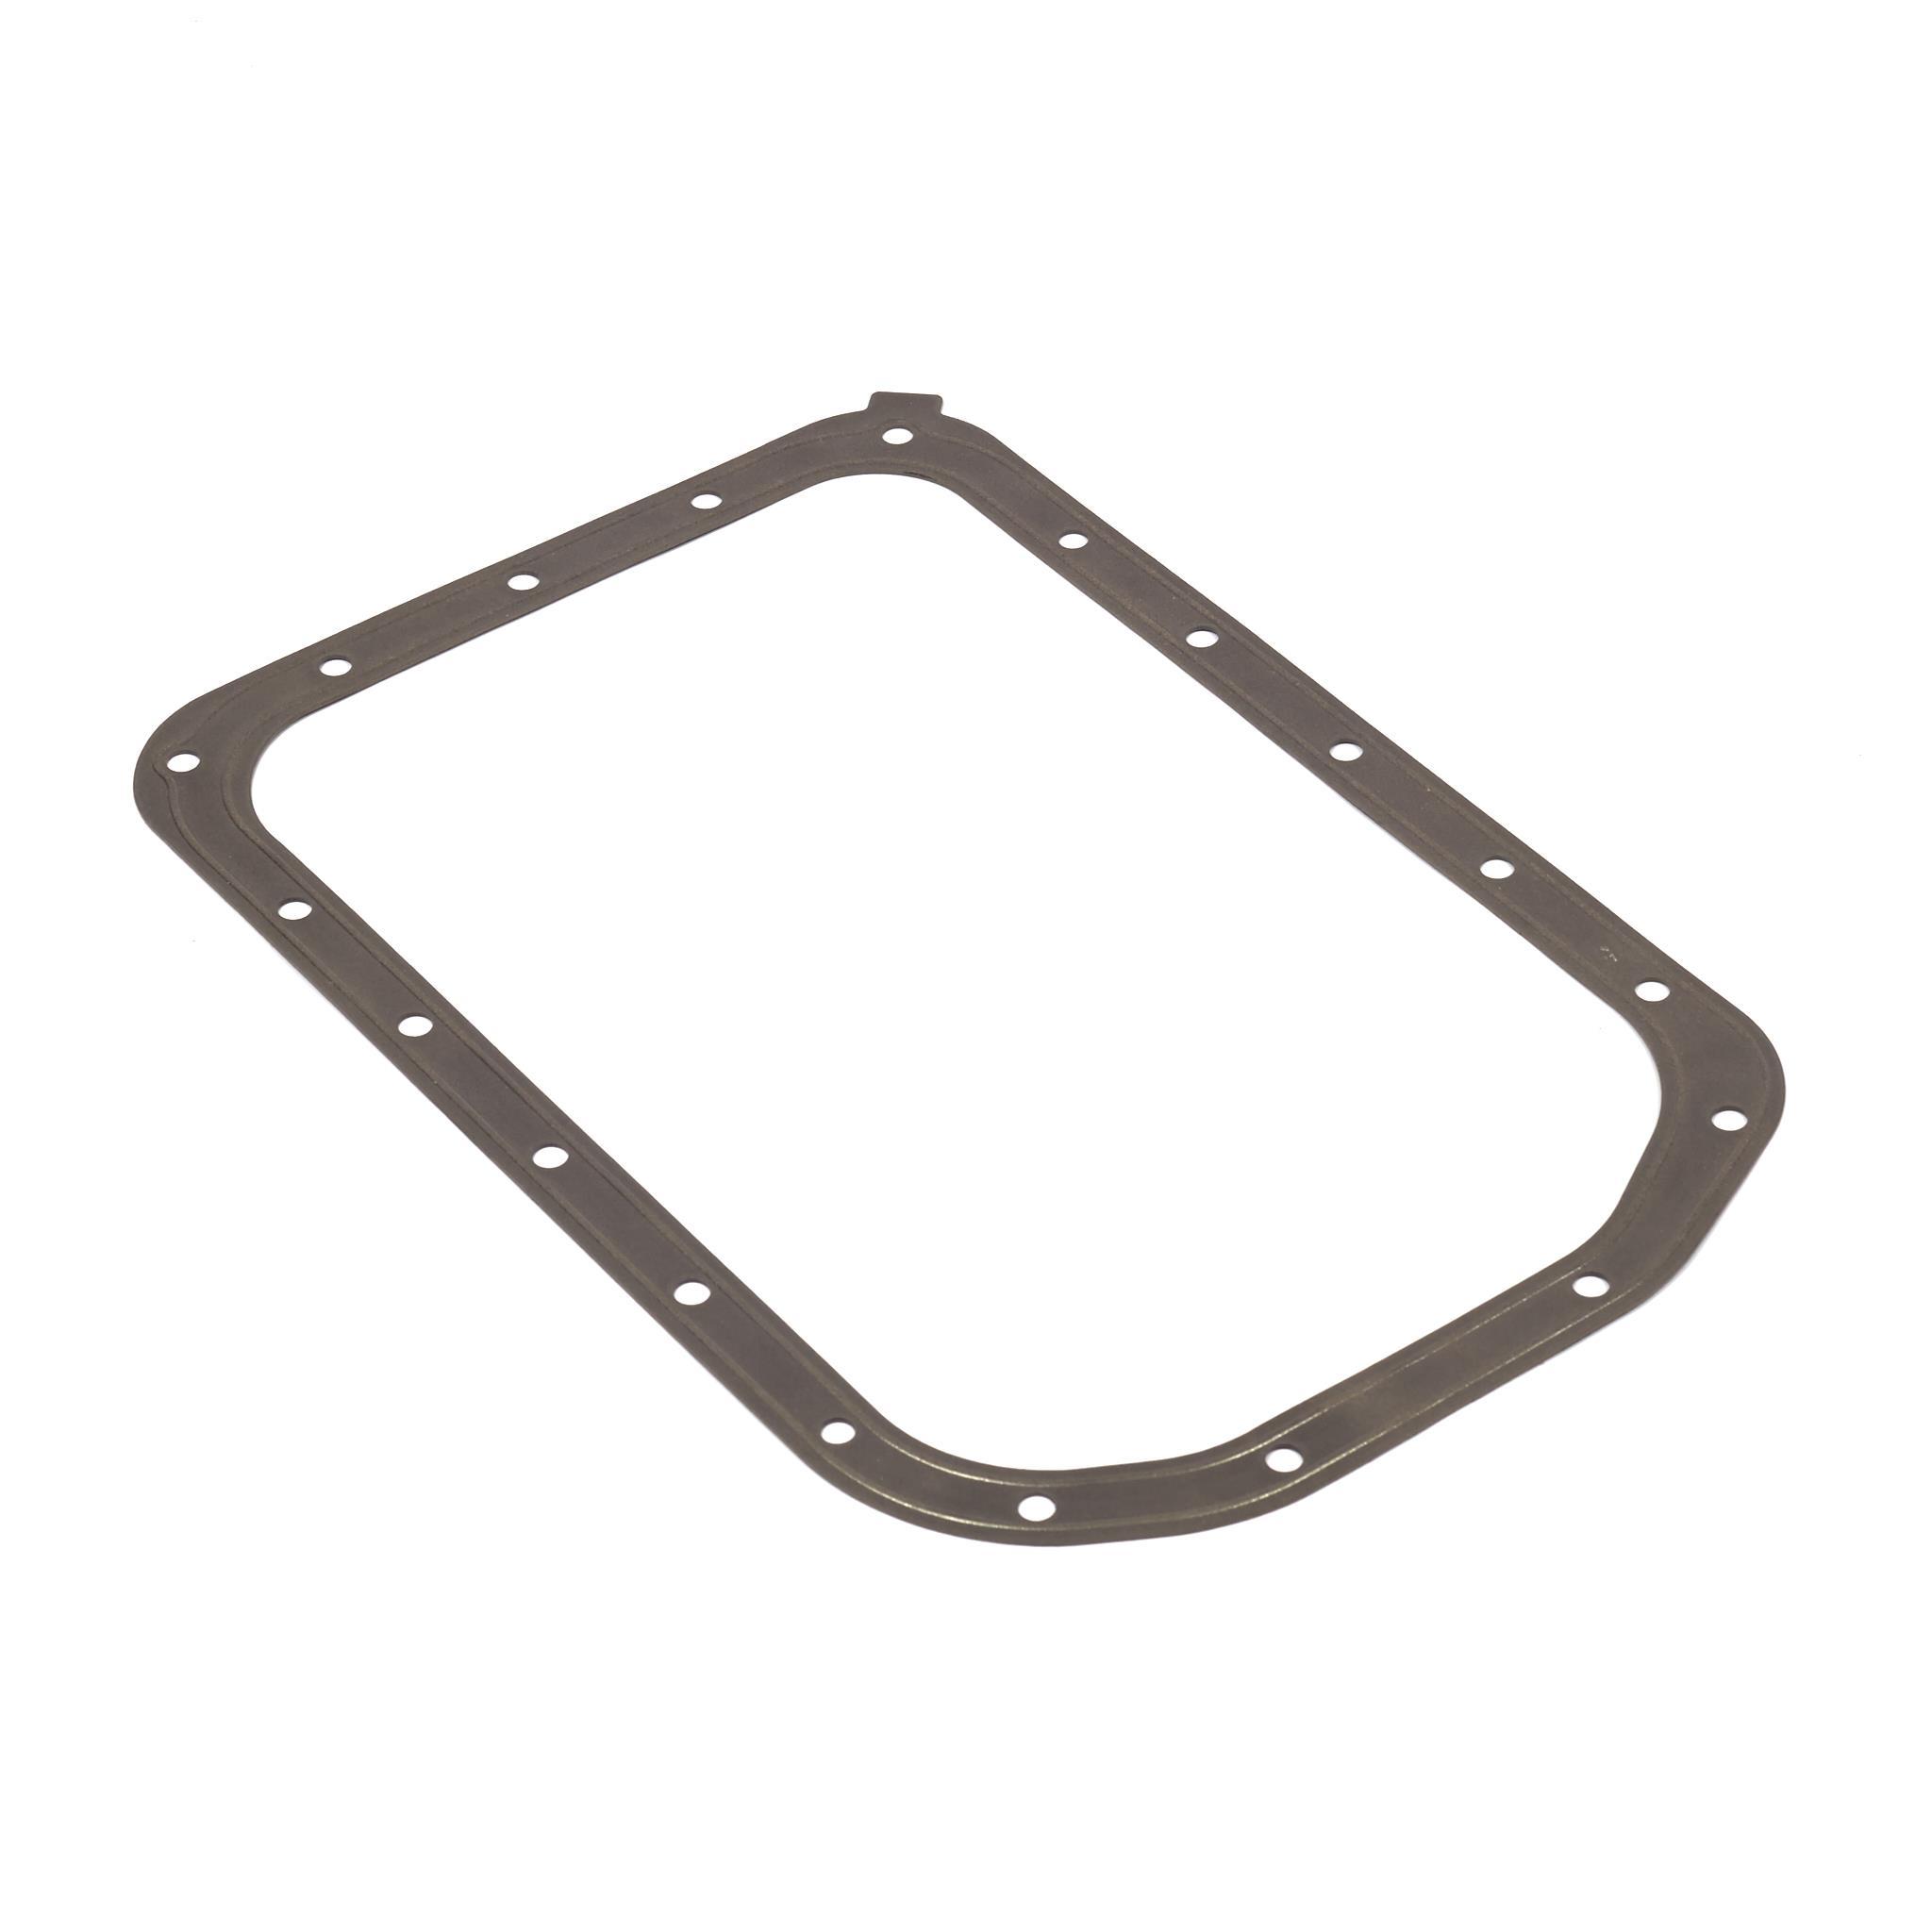 How To Replace Oil Pan Gasket